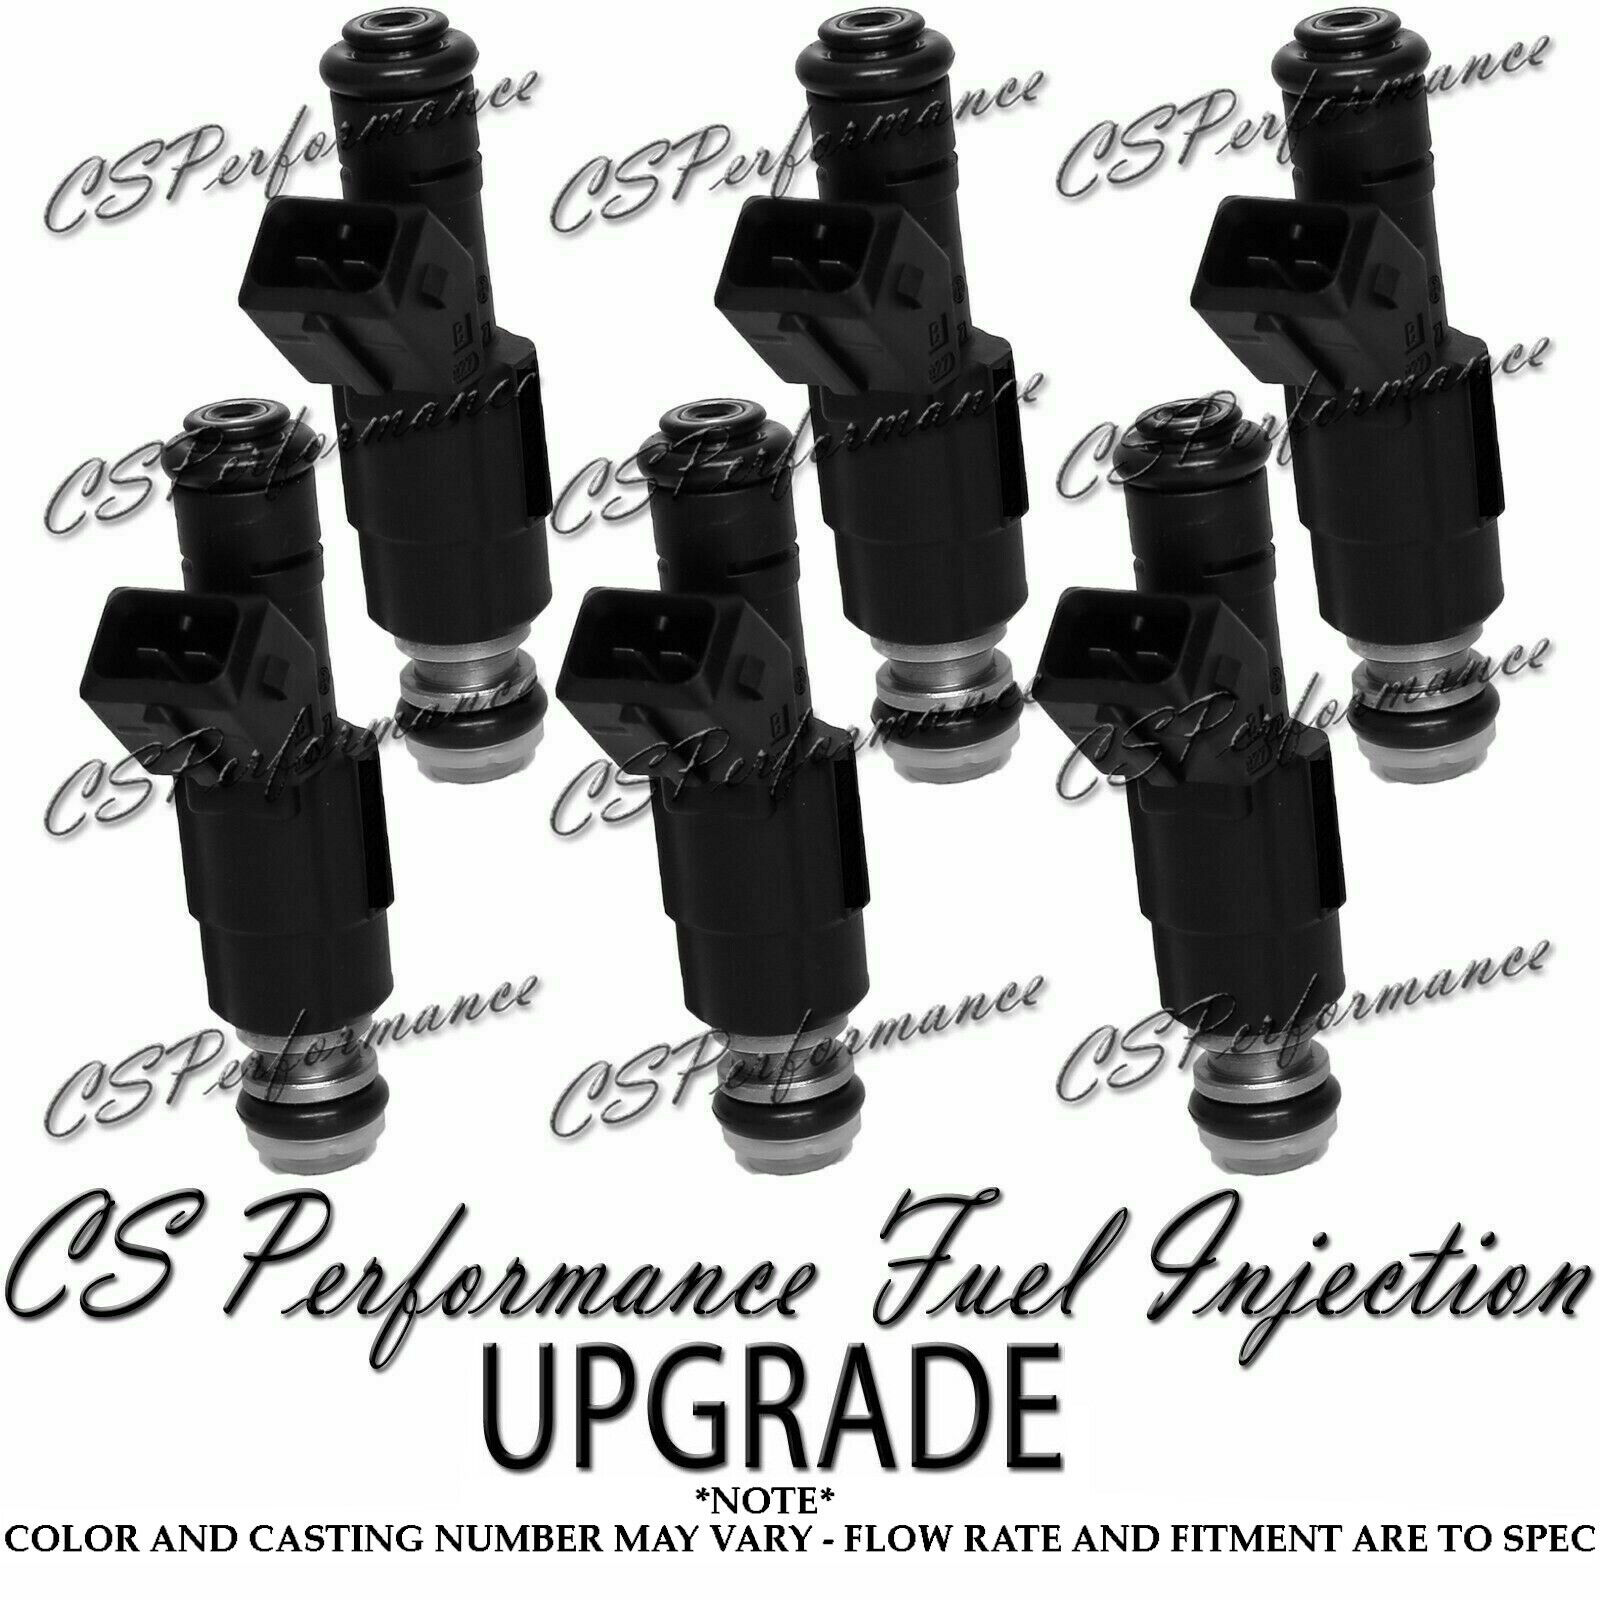 Bosch III UPGRADE Fuel Injectors (6) set for 90-95 Buick Chevy Oldsmobile 3.8L